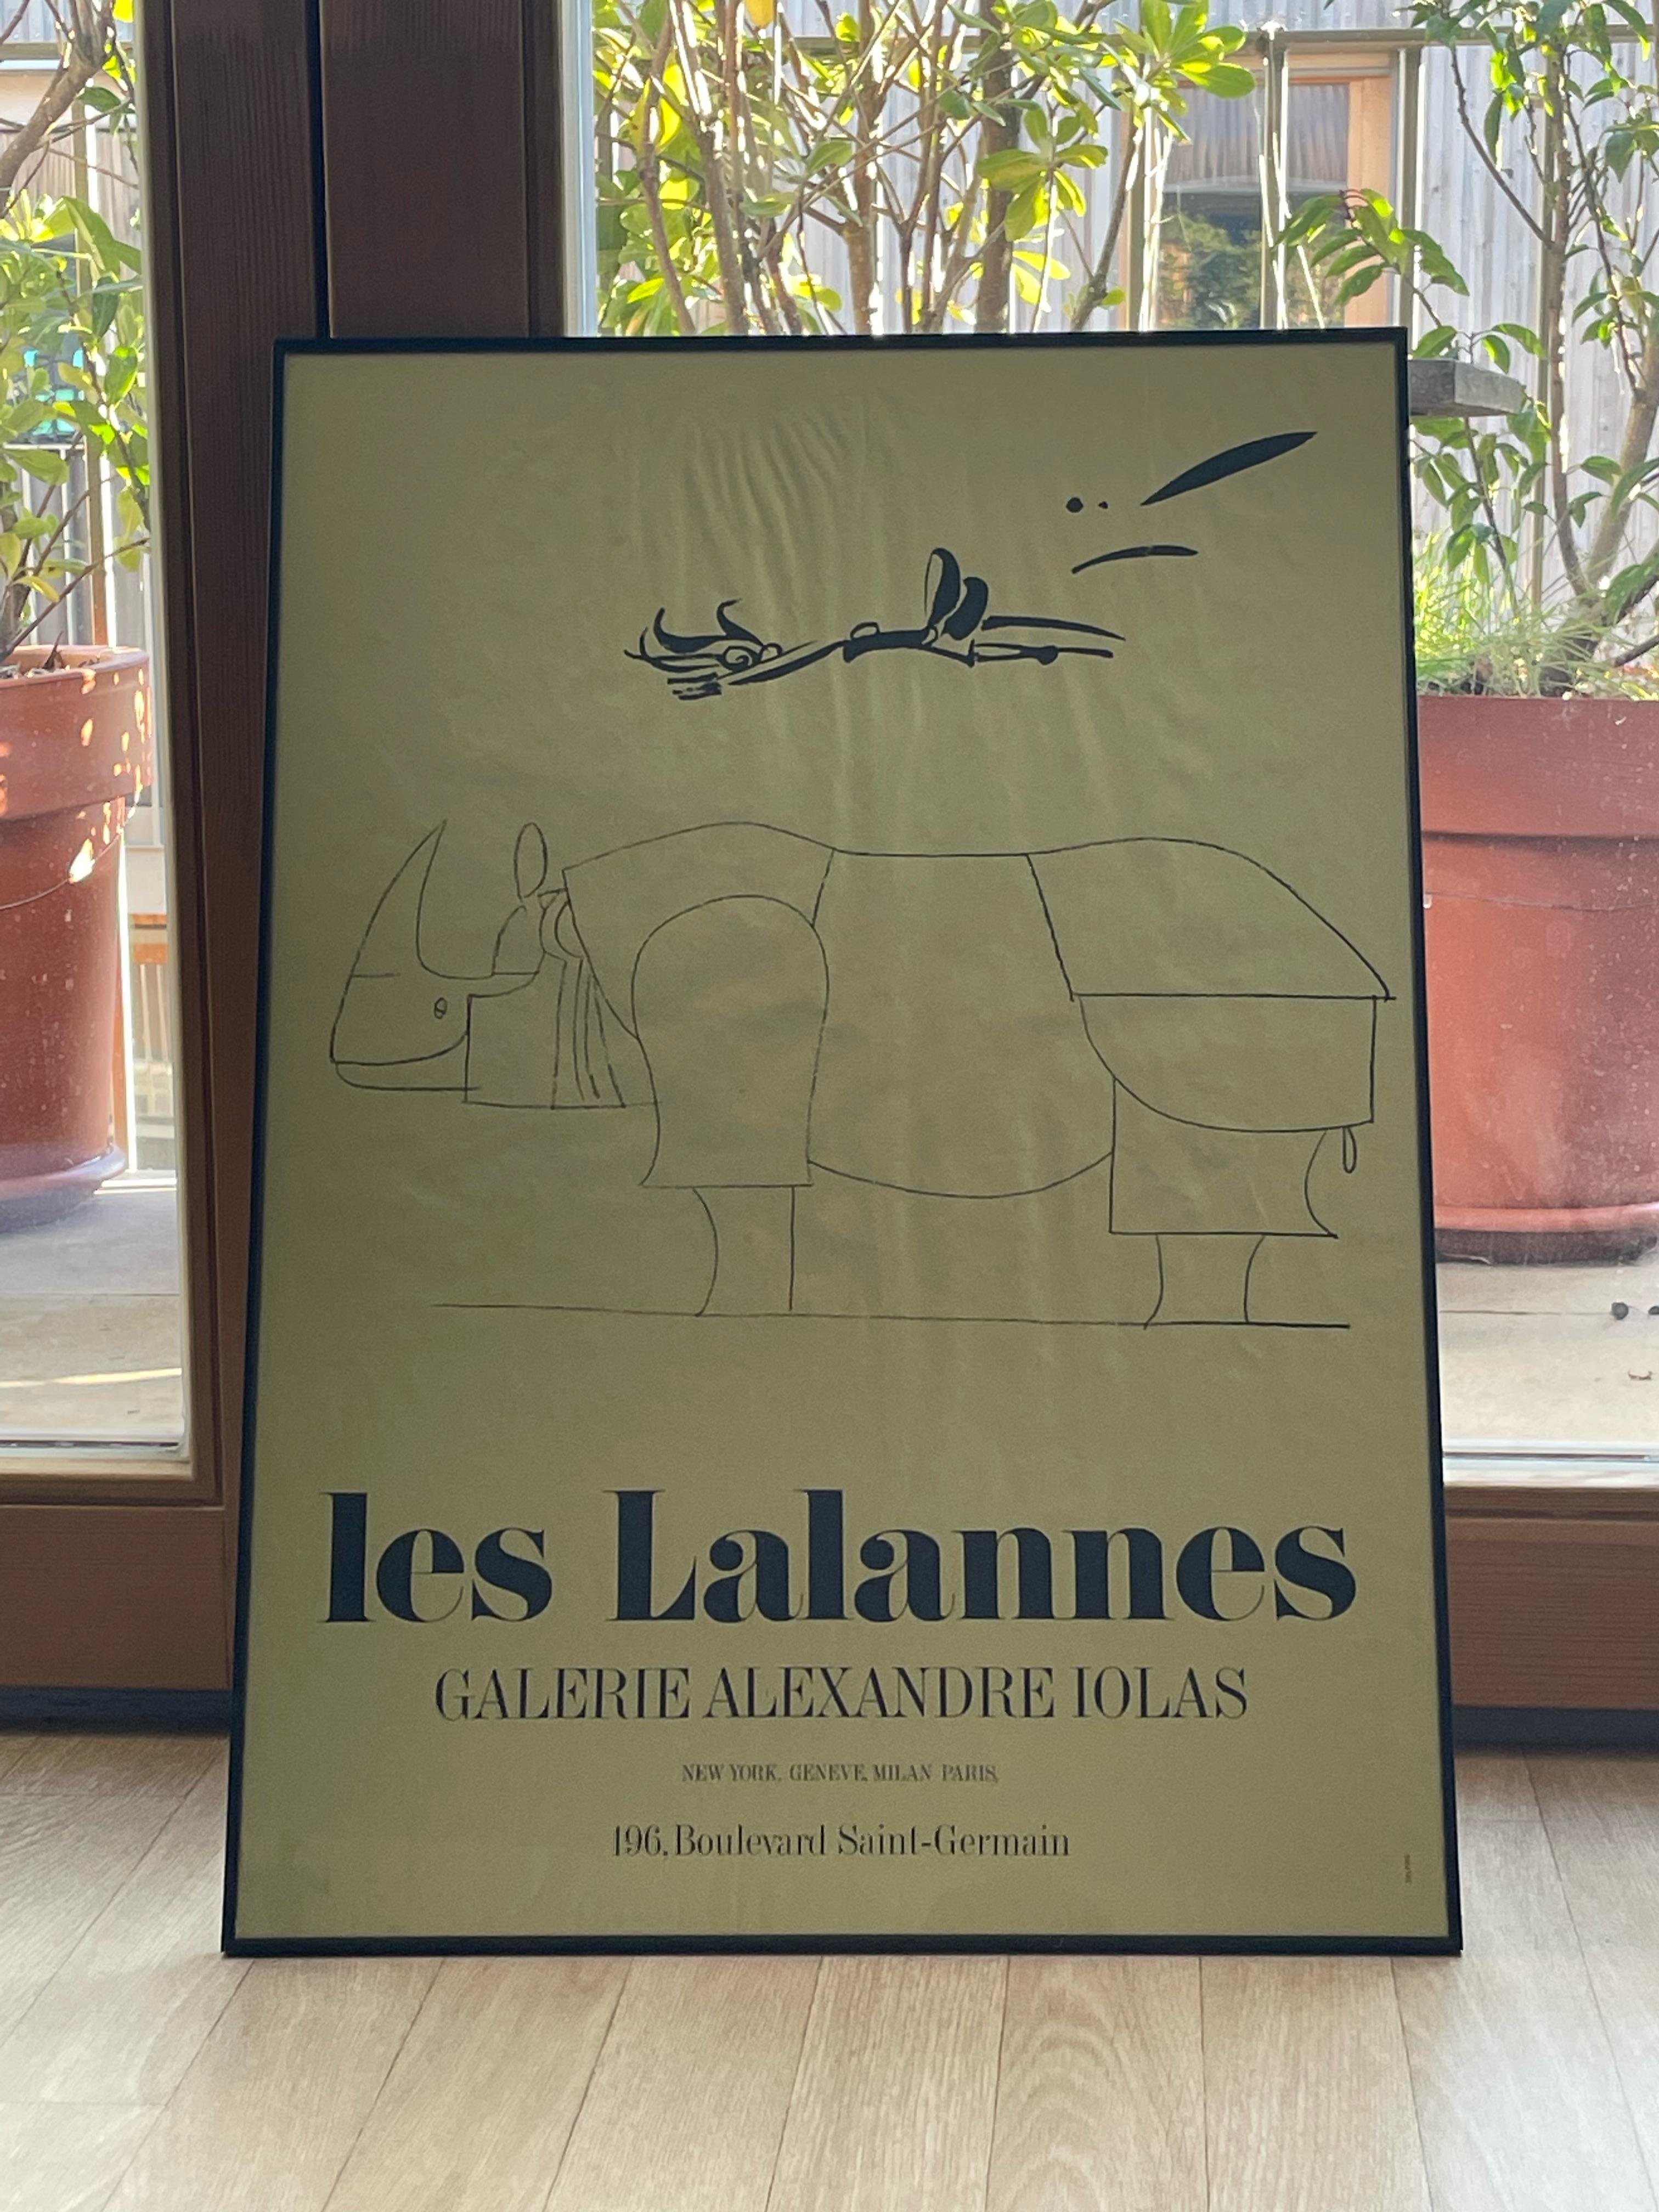 François-Xavier Lalanne (1927-2008) Rhinocéros (also known as Rhinocrétaire)
 
Very rare poster for the gallery Alexandre Iolas, printed on golden paper, 1970’s, very good condition
Dimensions of the paper : 70 x 50 cm (27,56 x 19,68 inches)
